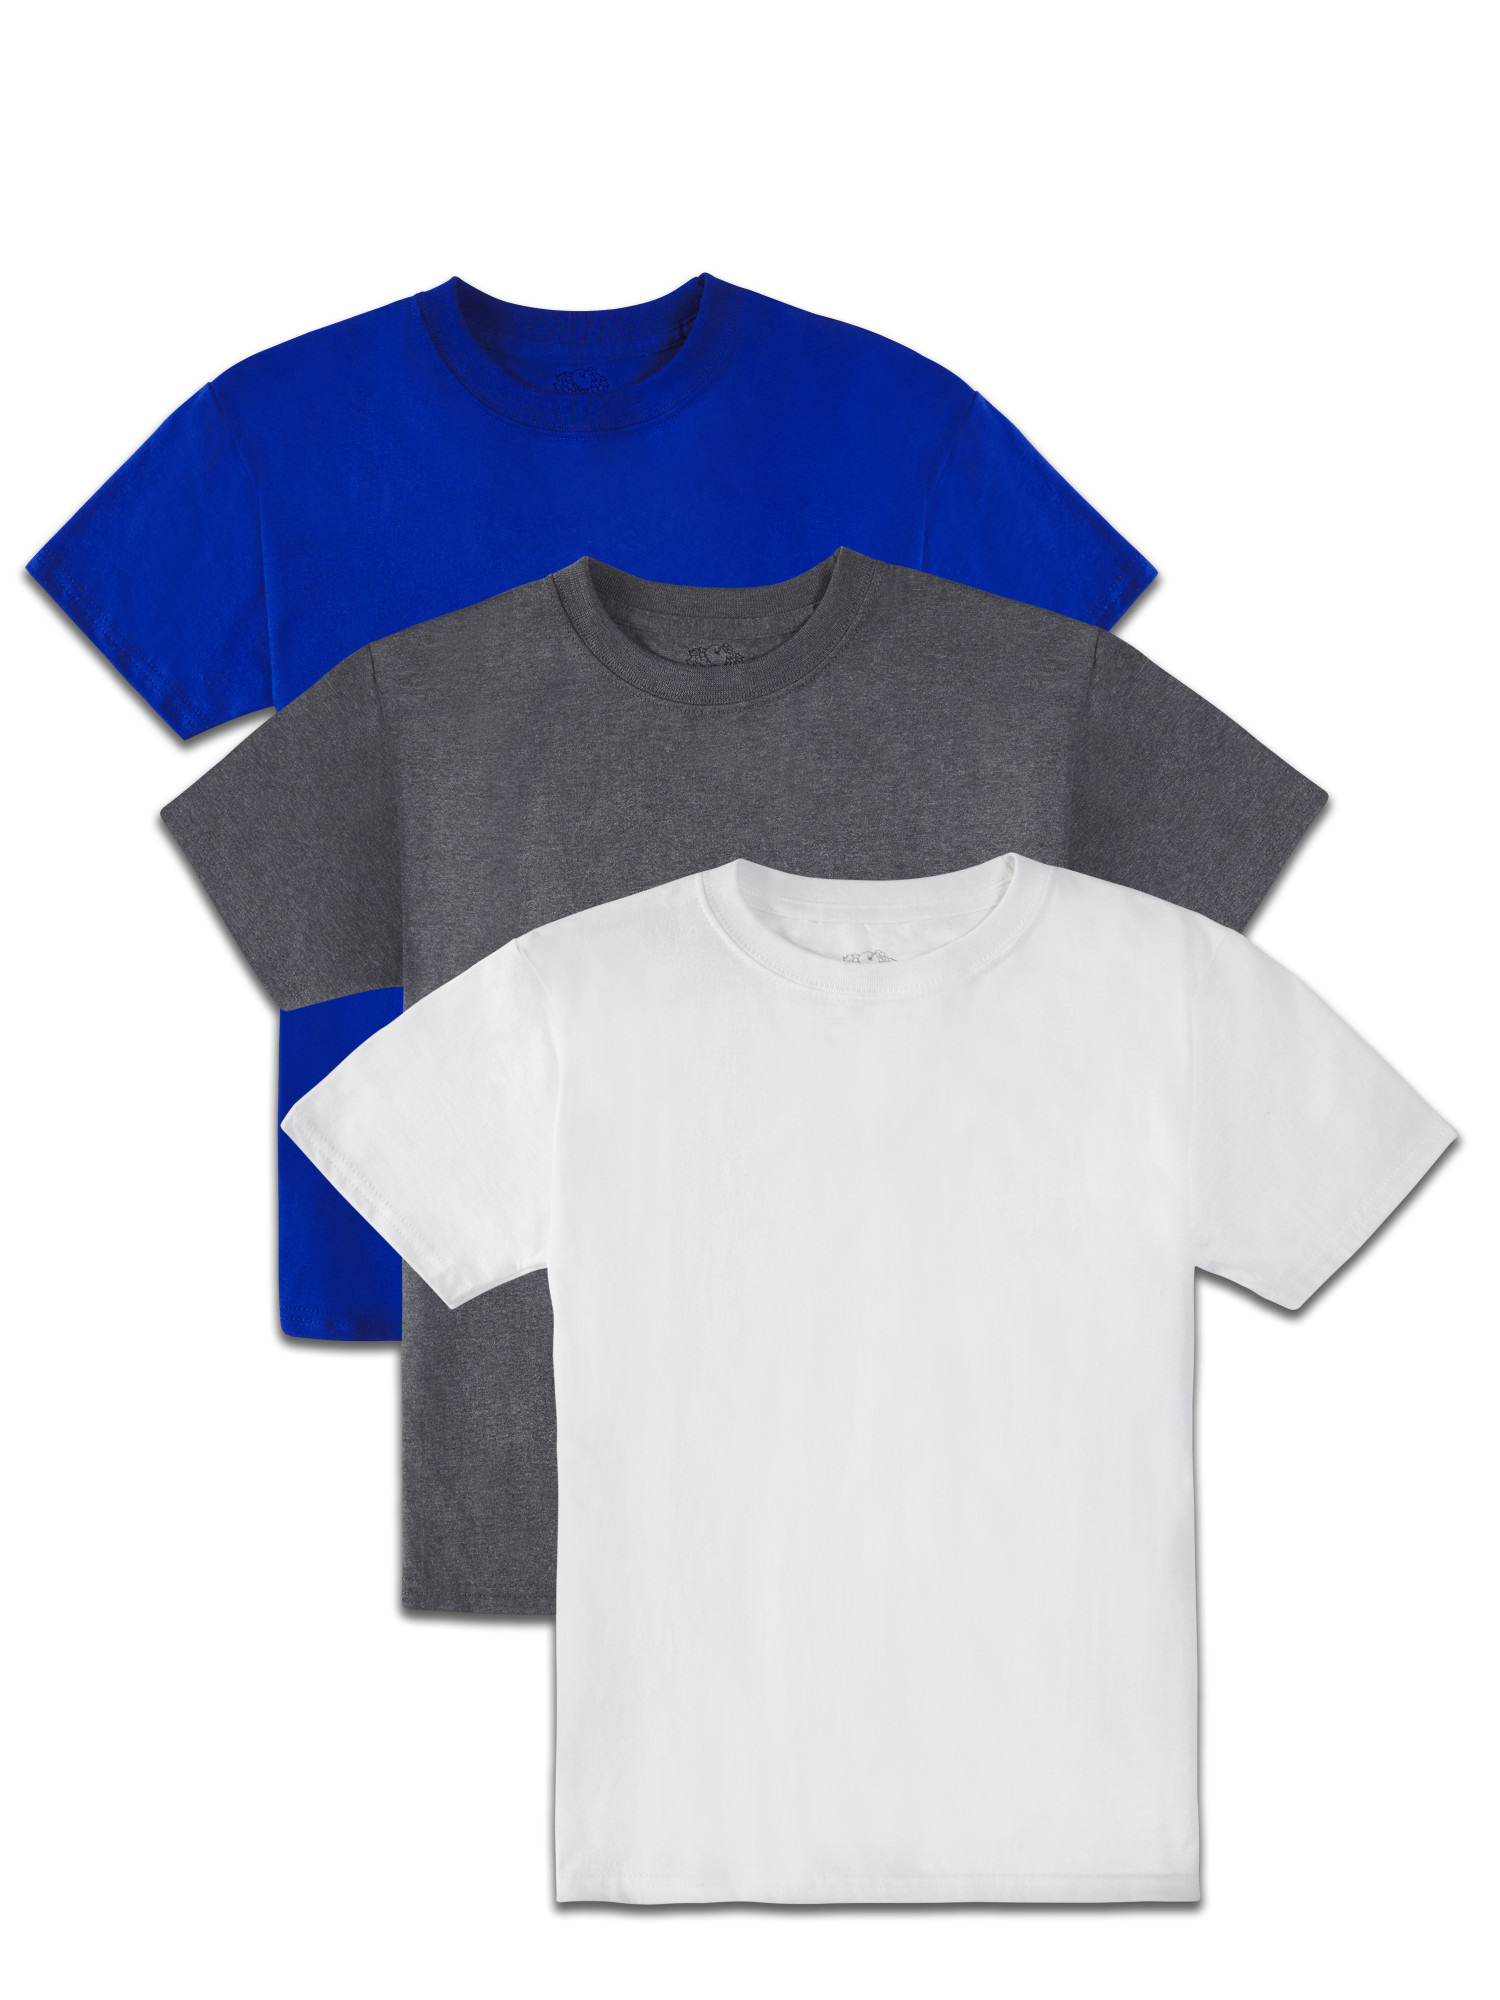 Fruit of the Loom Boys Short Sleeve Crew T-Shirts, 3 Pack - image 1 of 5